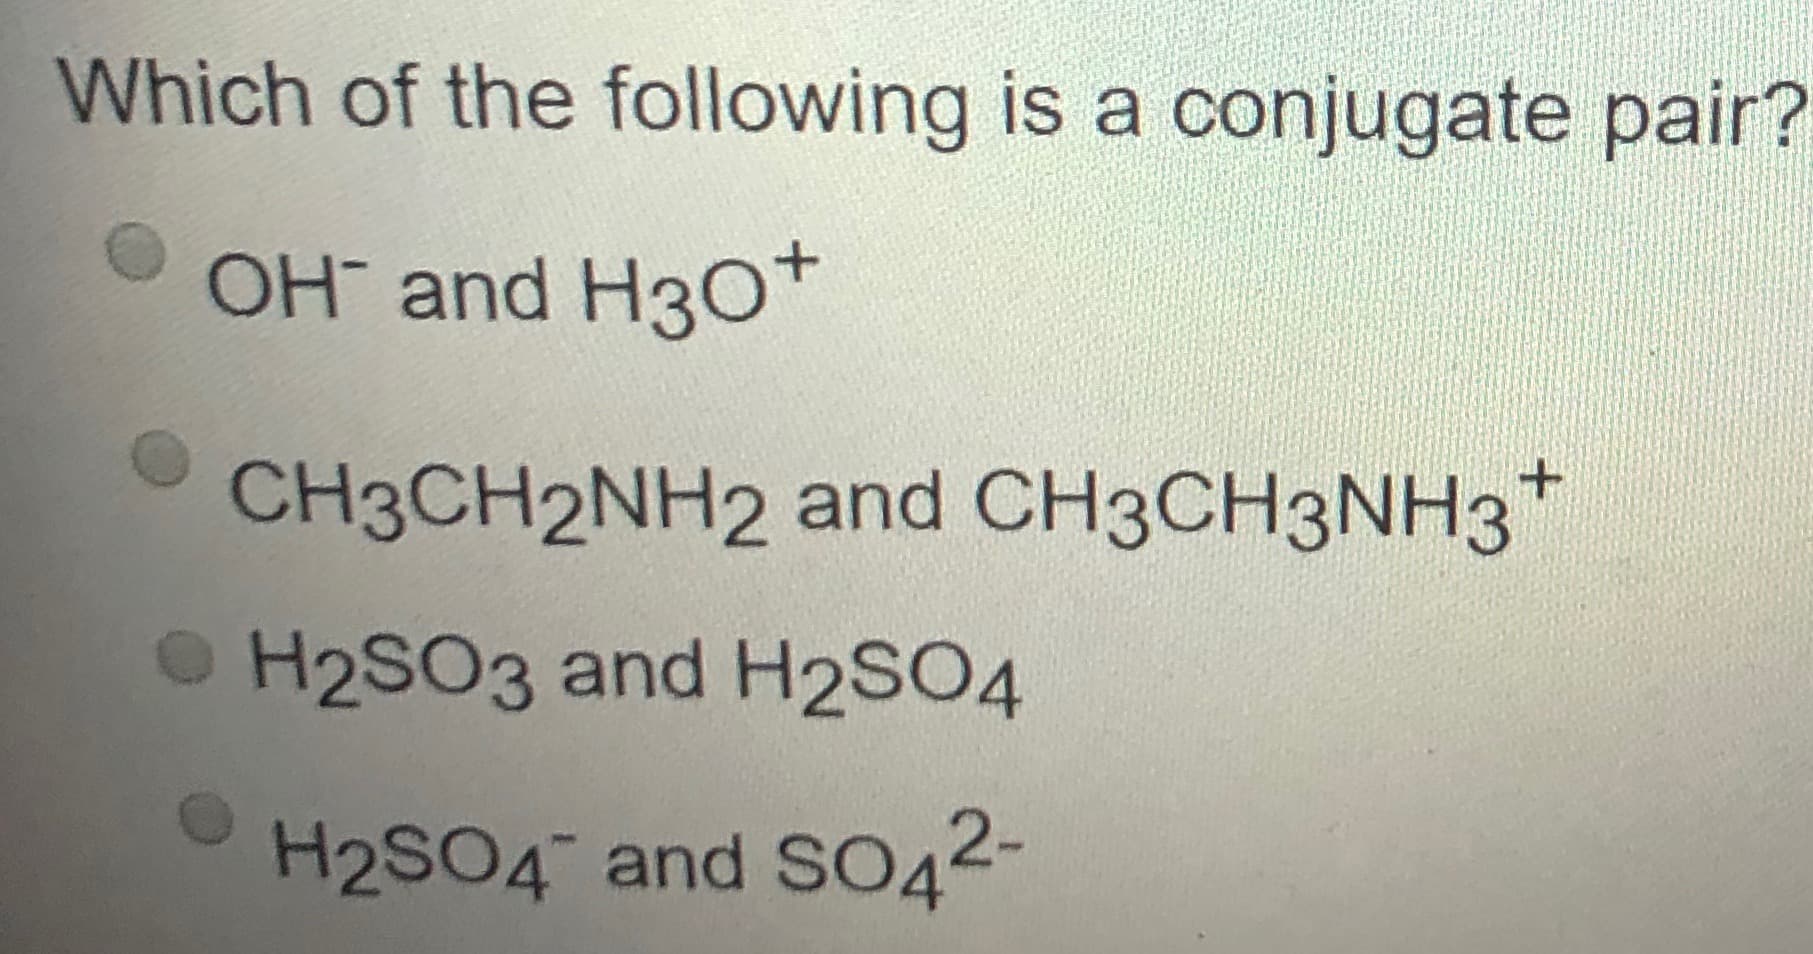 Which of the following is a conjugate pair?
OH and H30*
CH3CH2NH2 and CH3CH3NH3*
